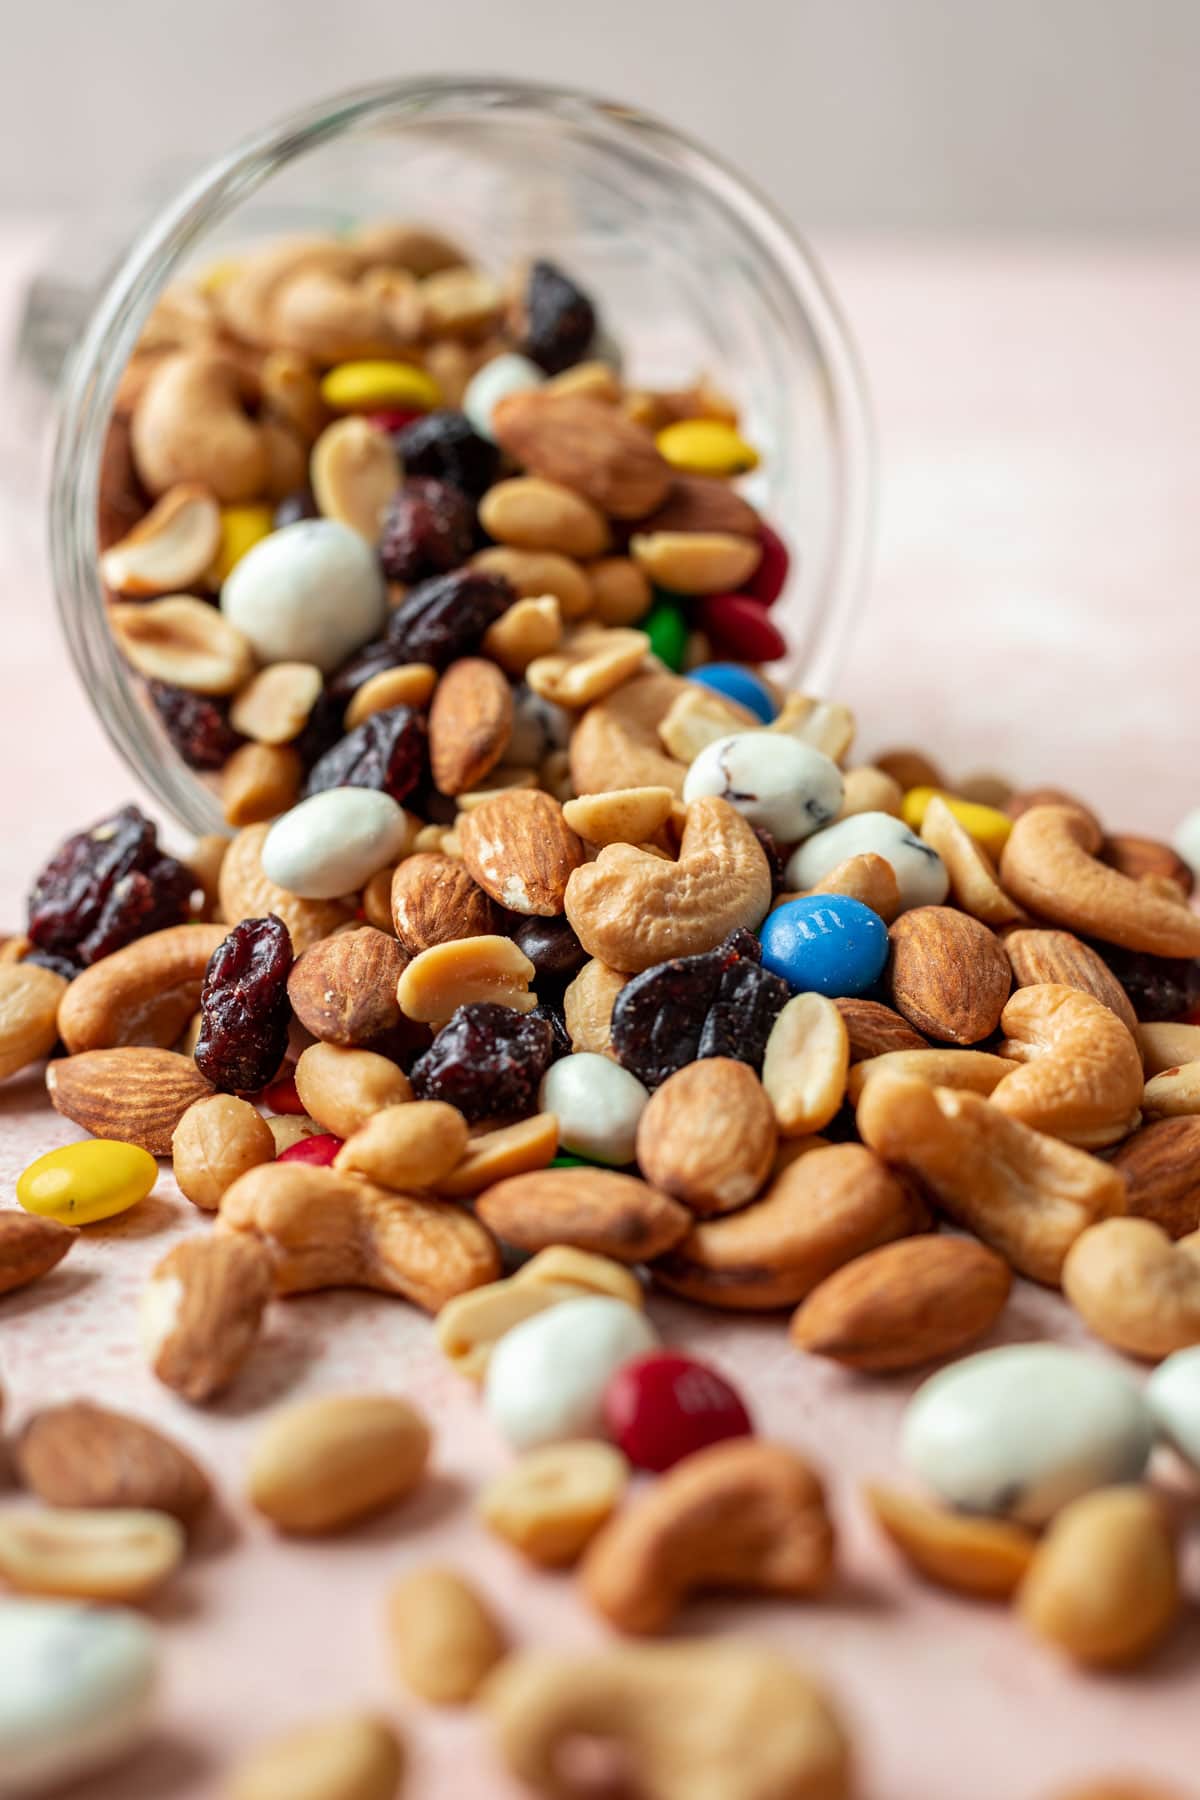 Classic Trail Mix combined spilling out of glass jar, side view close up